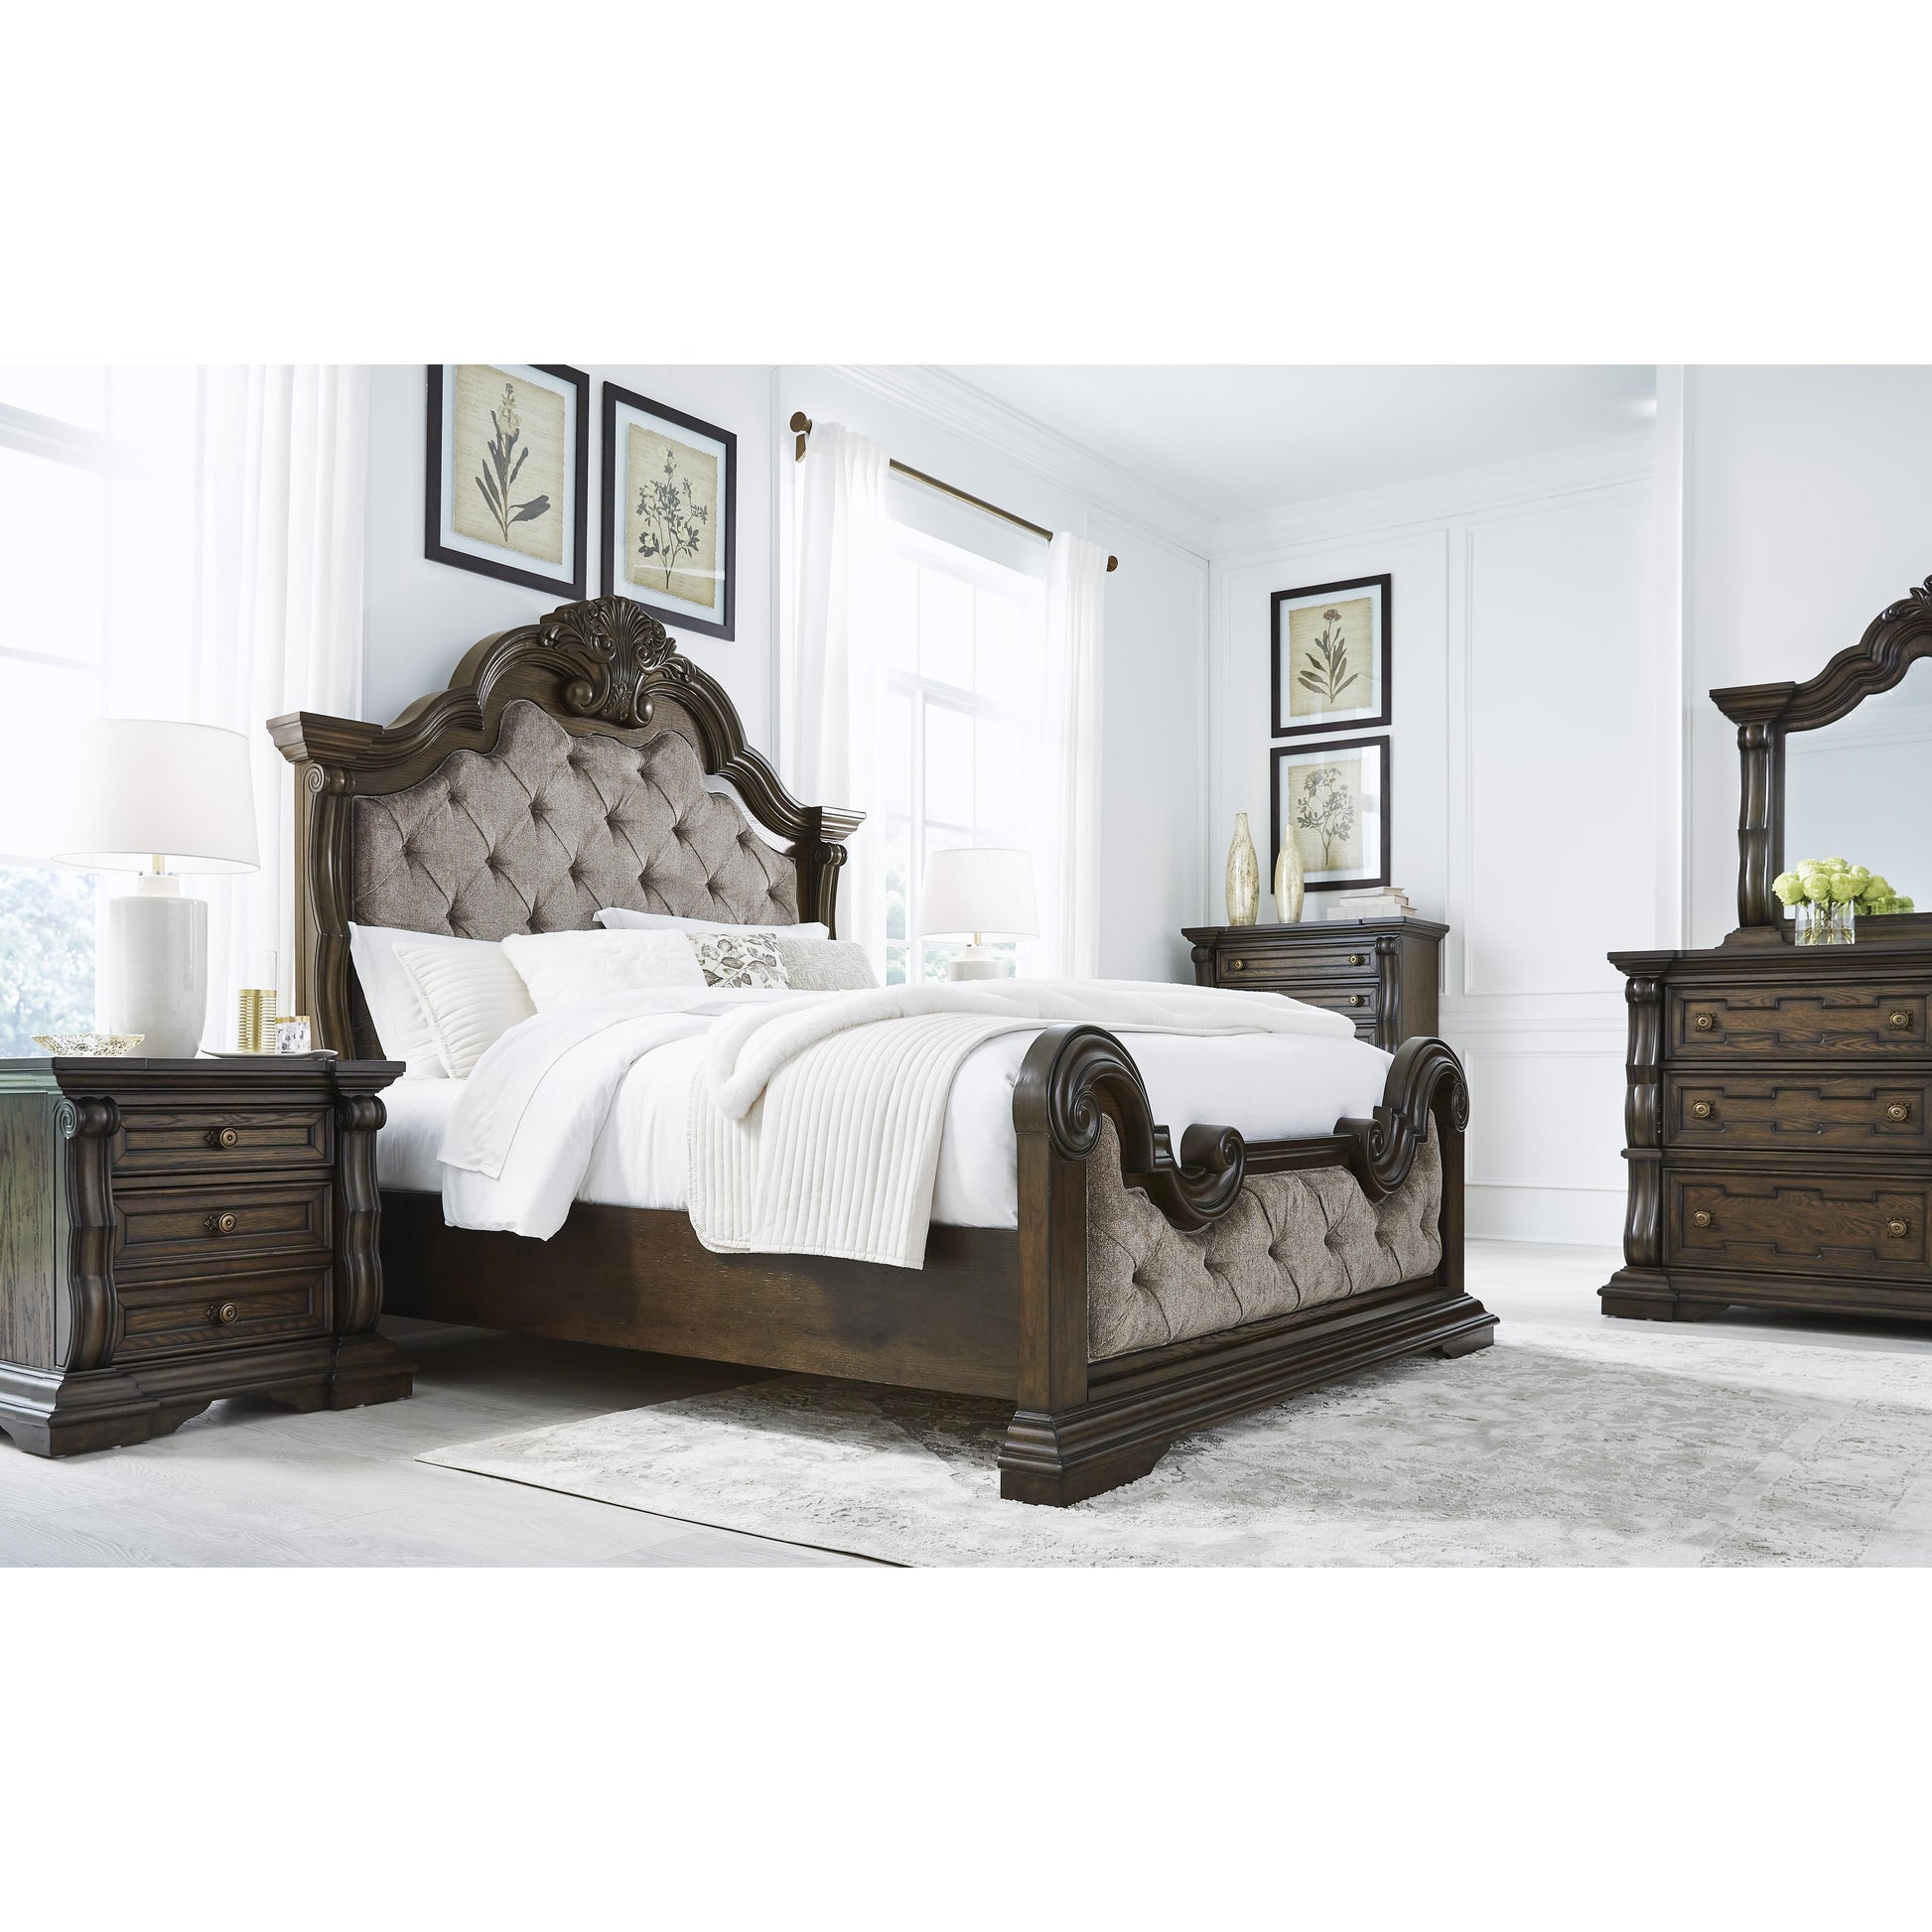 Signature Design by Ashley Maylee King Upholstered Bed B947-58/B947-56/B947-97 IMAGE 7